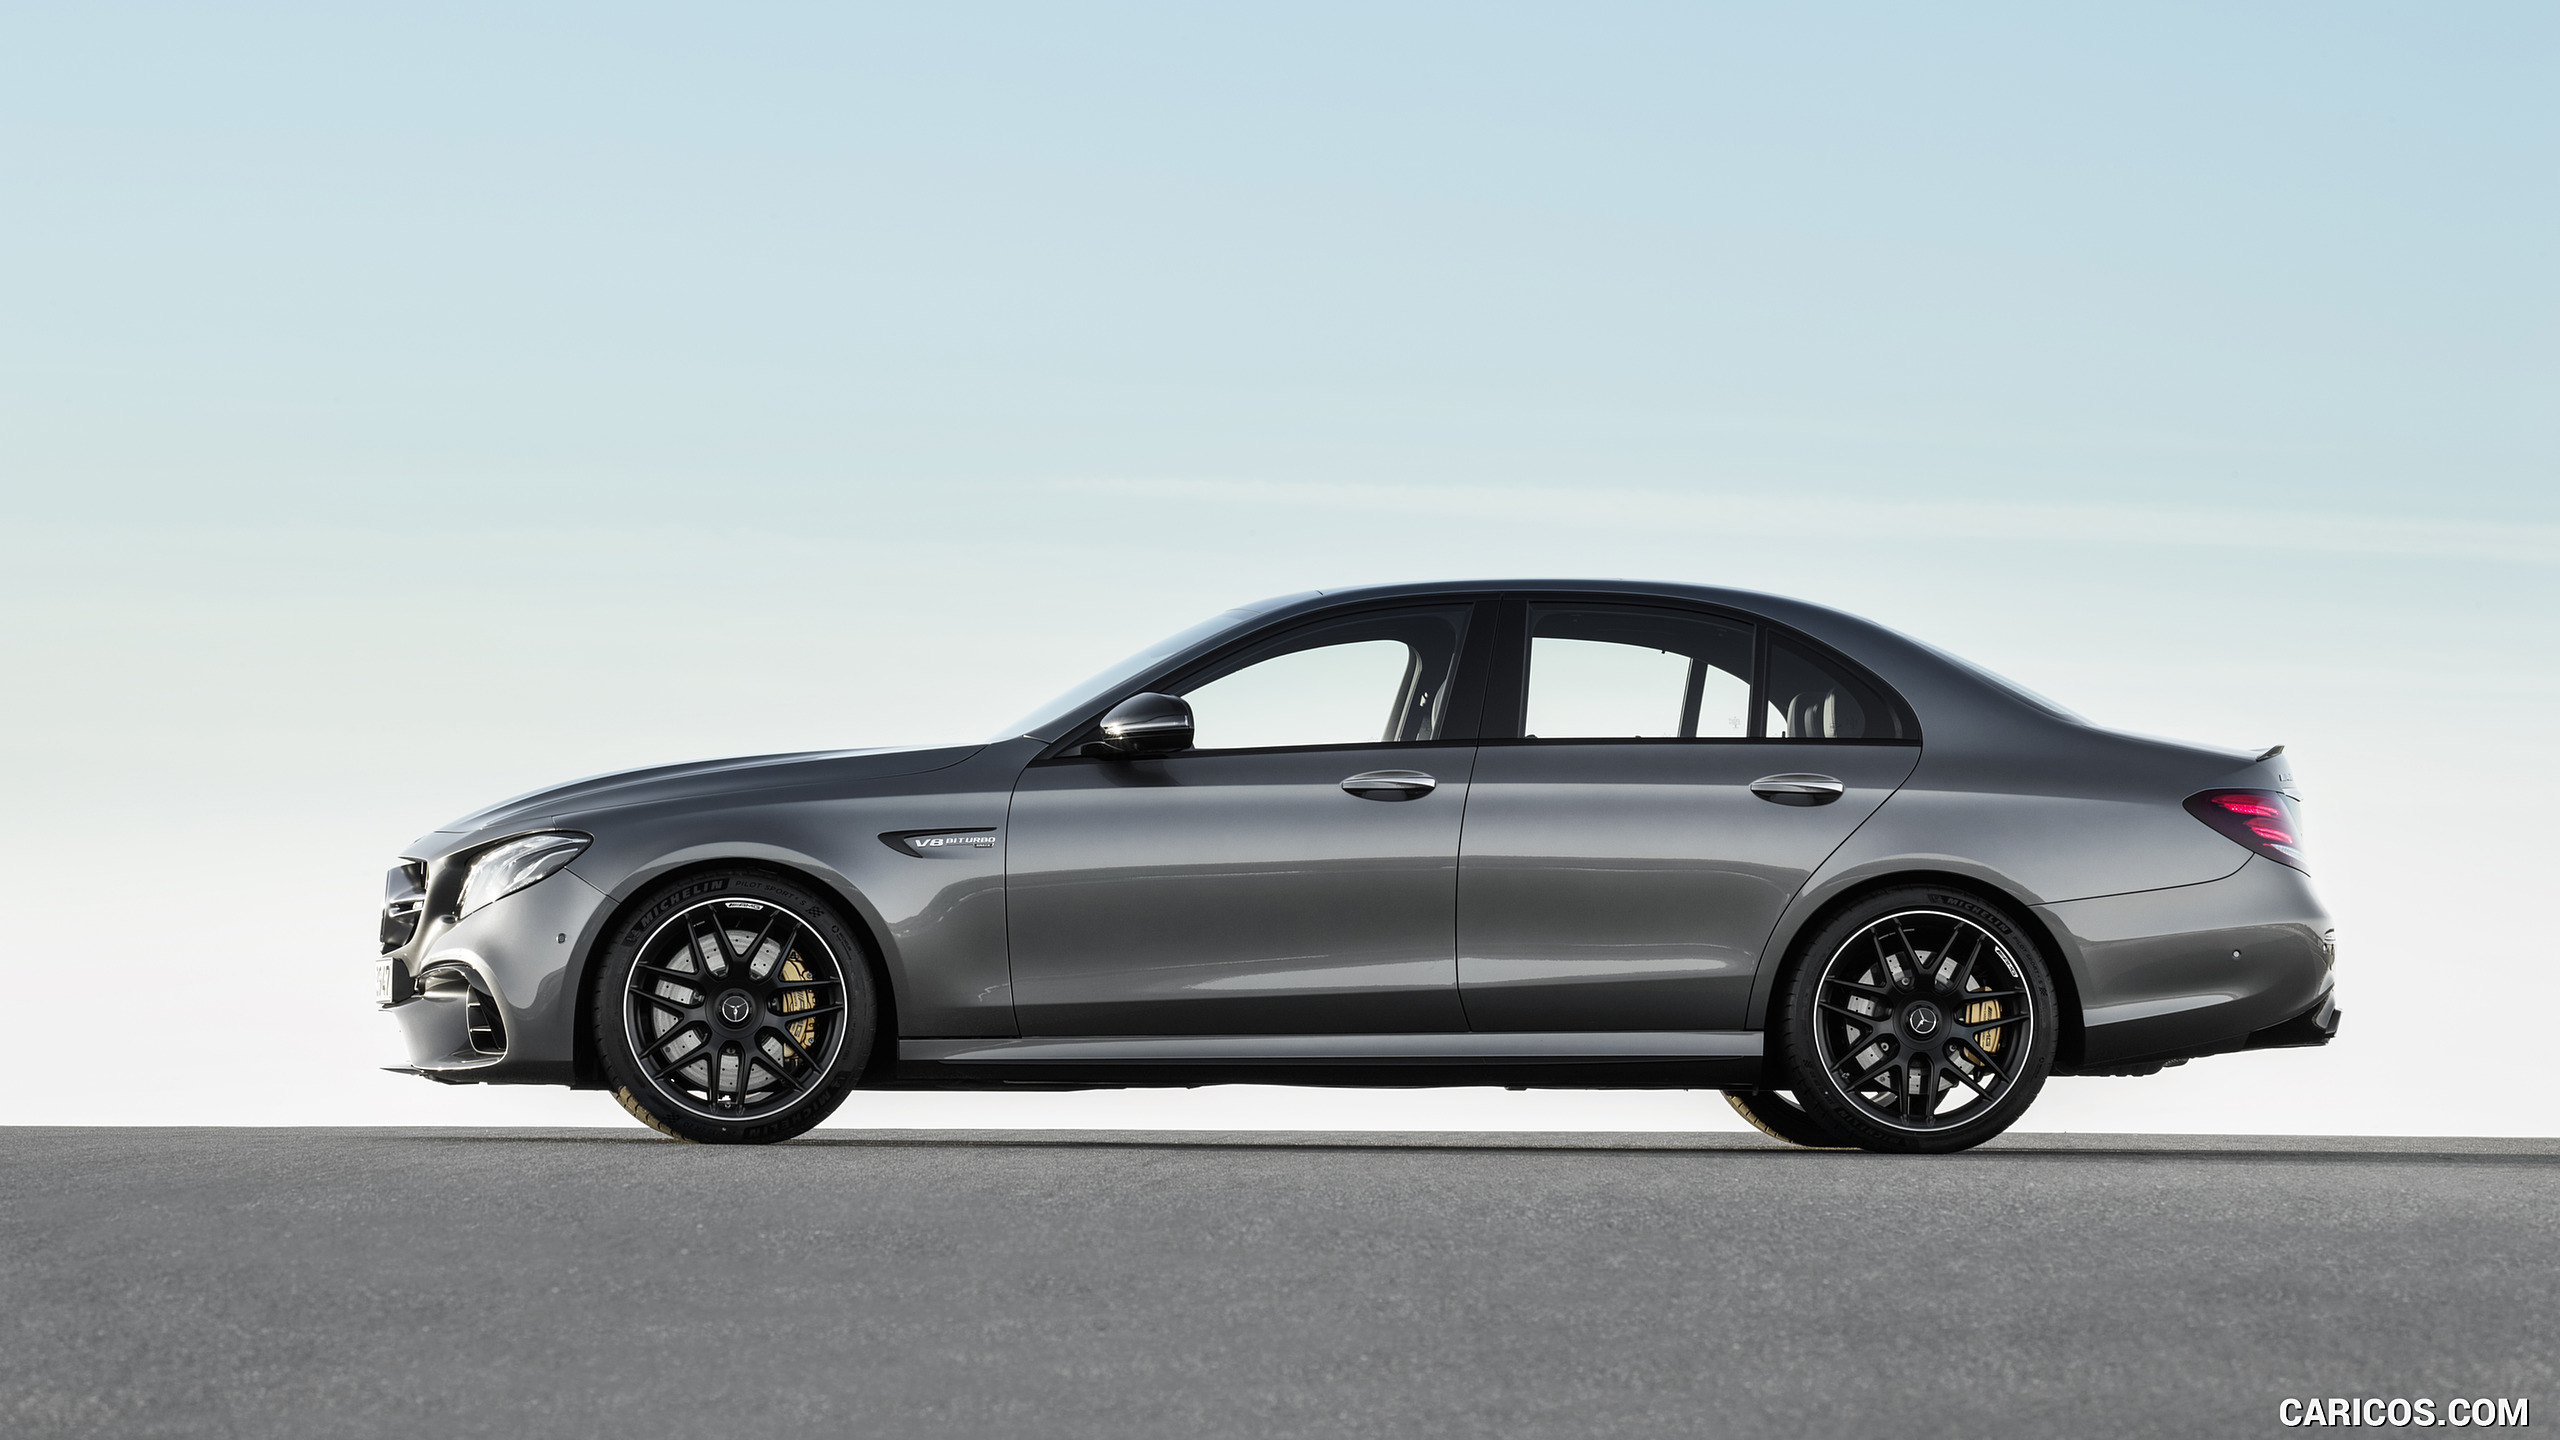 2018 Mercedes-AMG E63 S 4MATIC+ - Side, #25 of 323